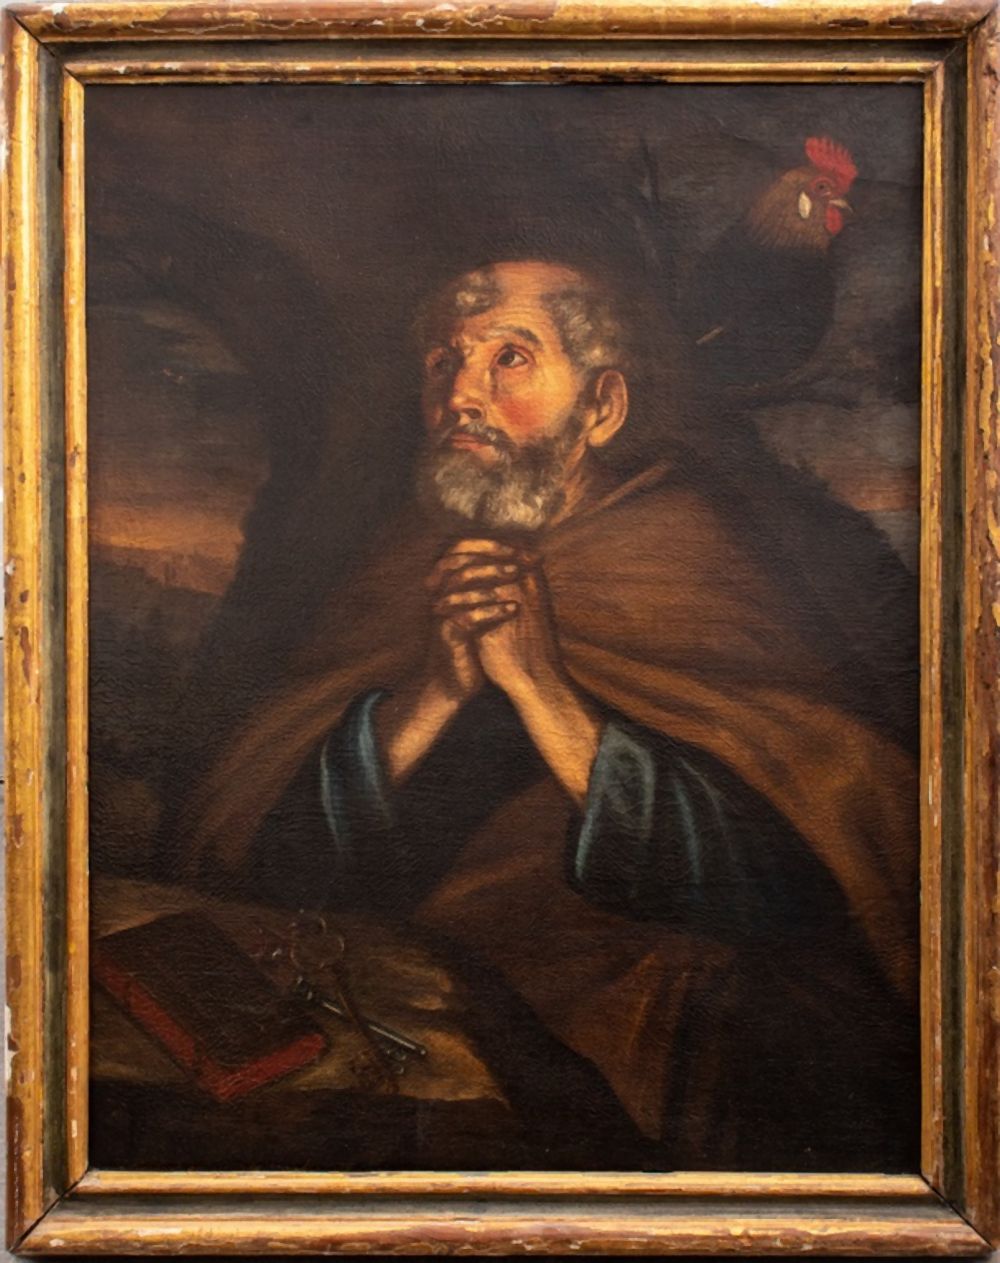 OLD MASTER OIL PAINTING OF SAINT 2fb81f